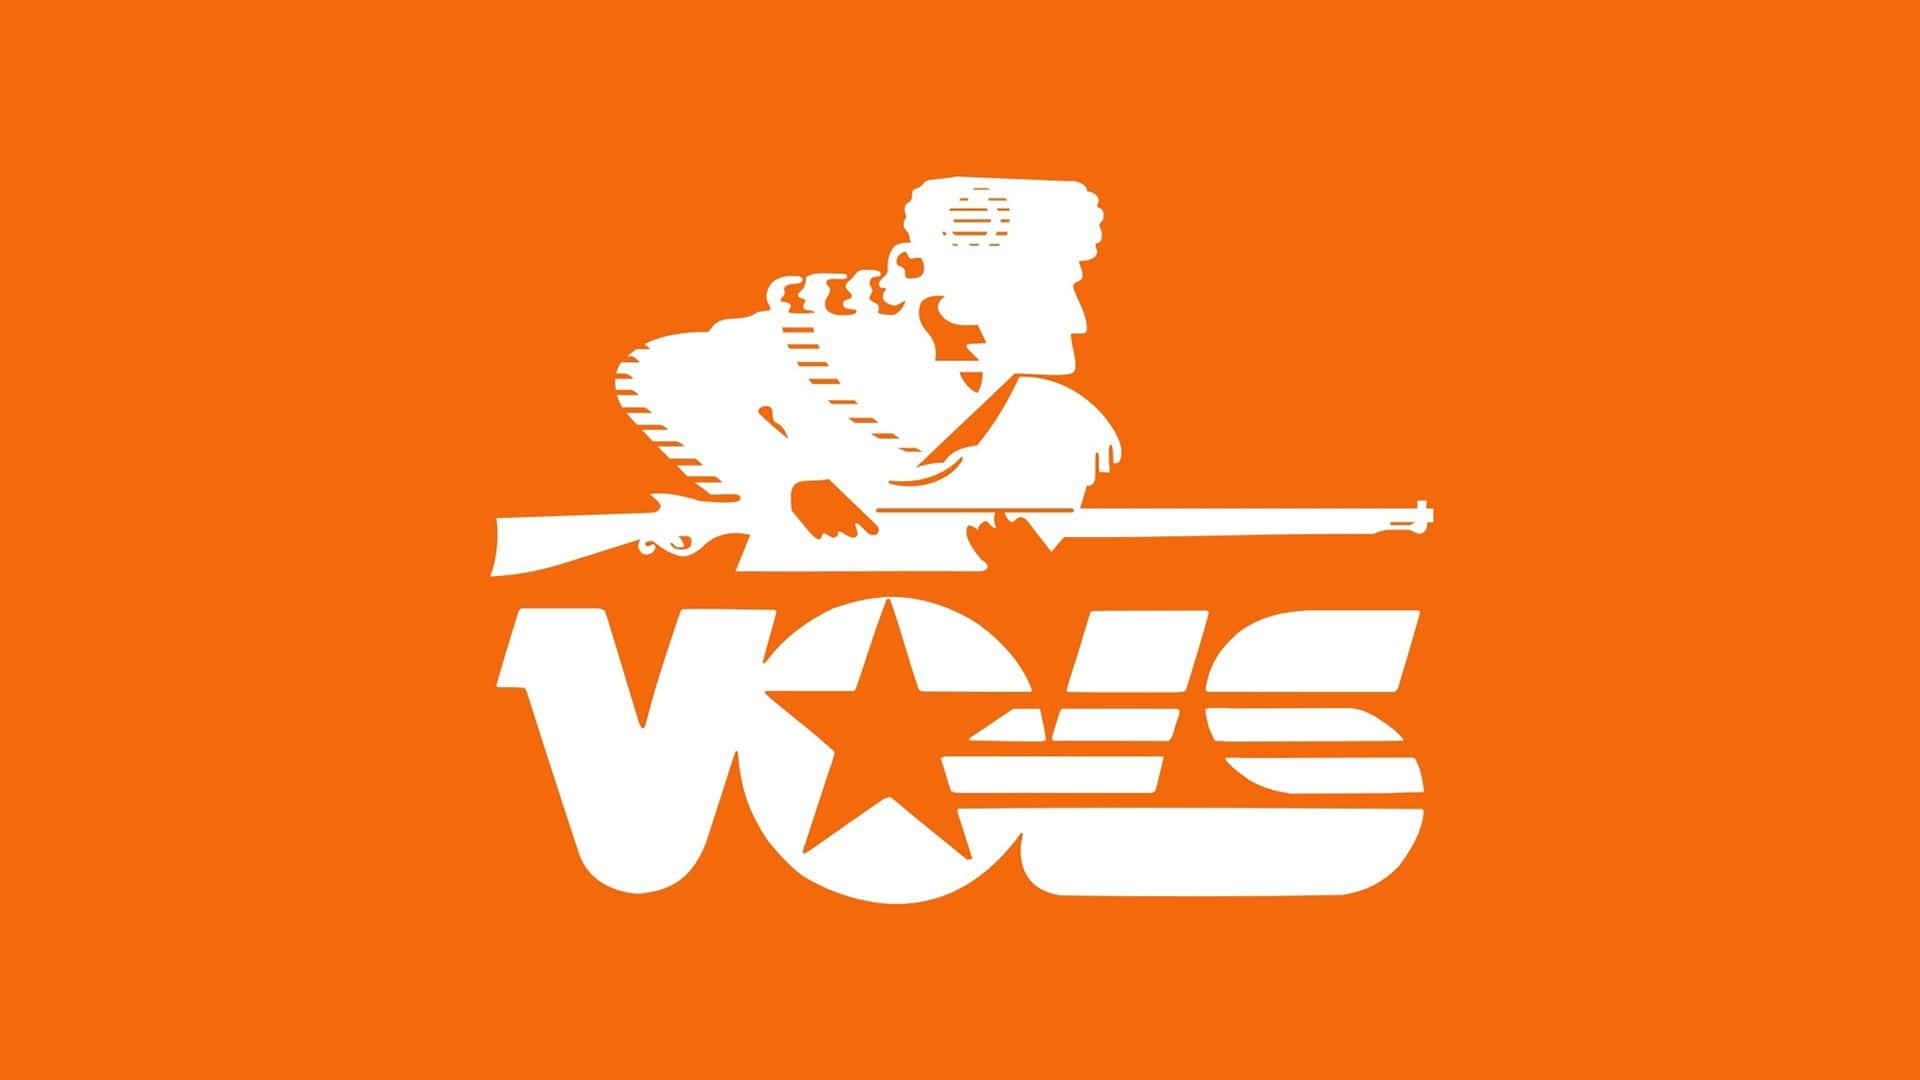 A White Logo With The Word Voos On An Orange Background Wallpaper